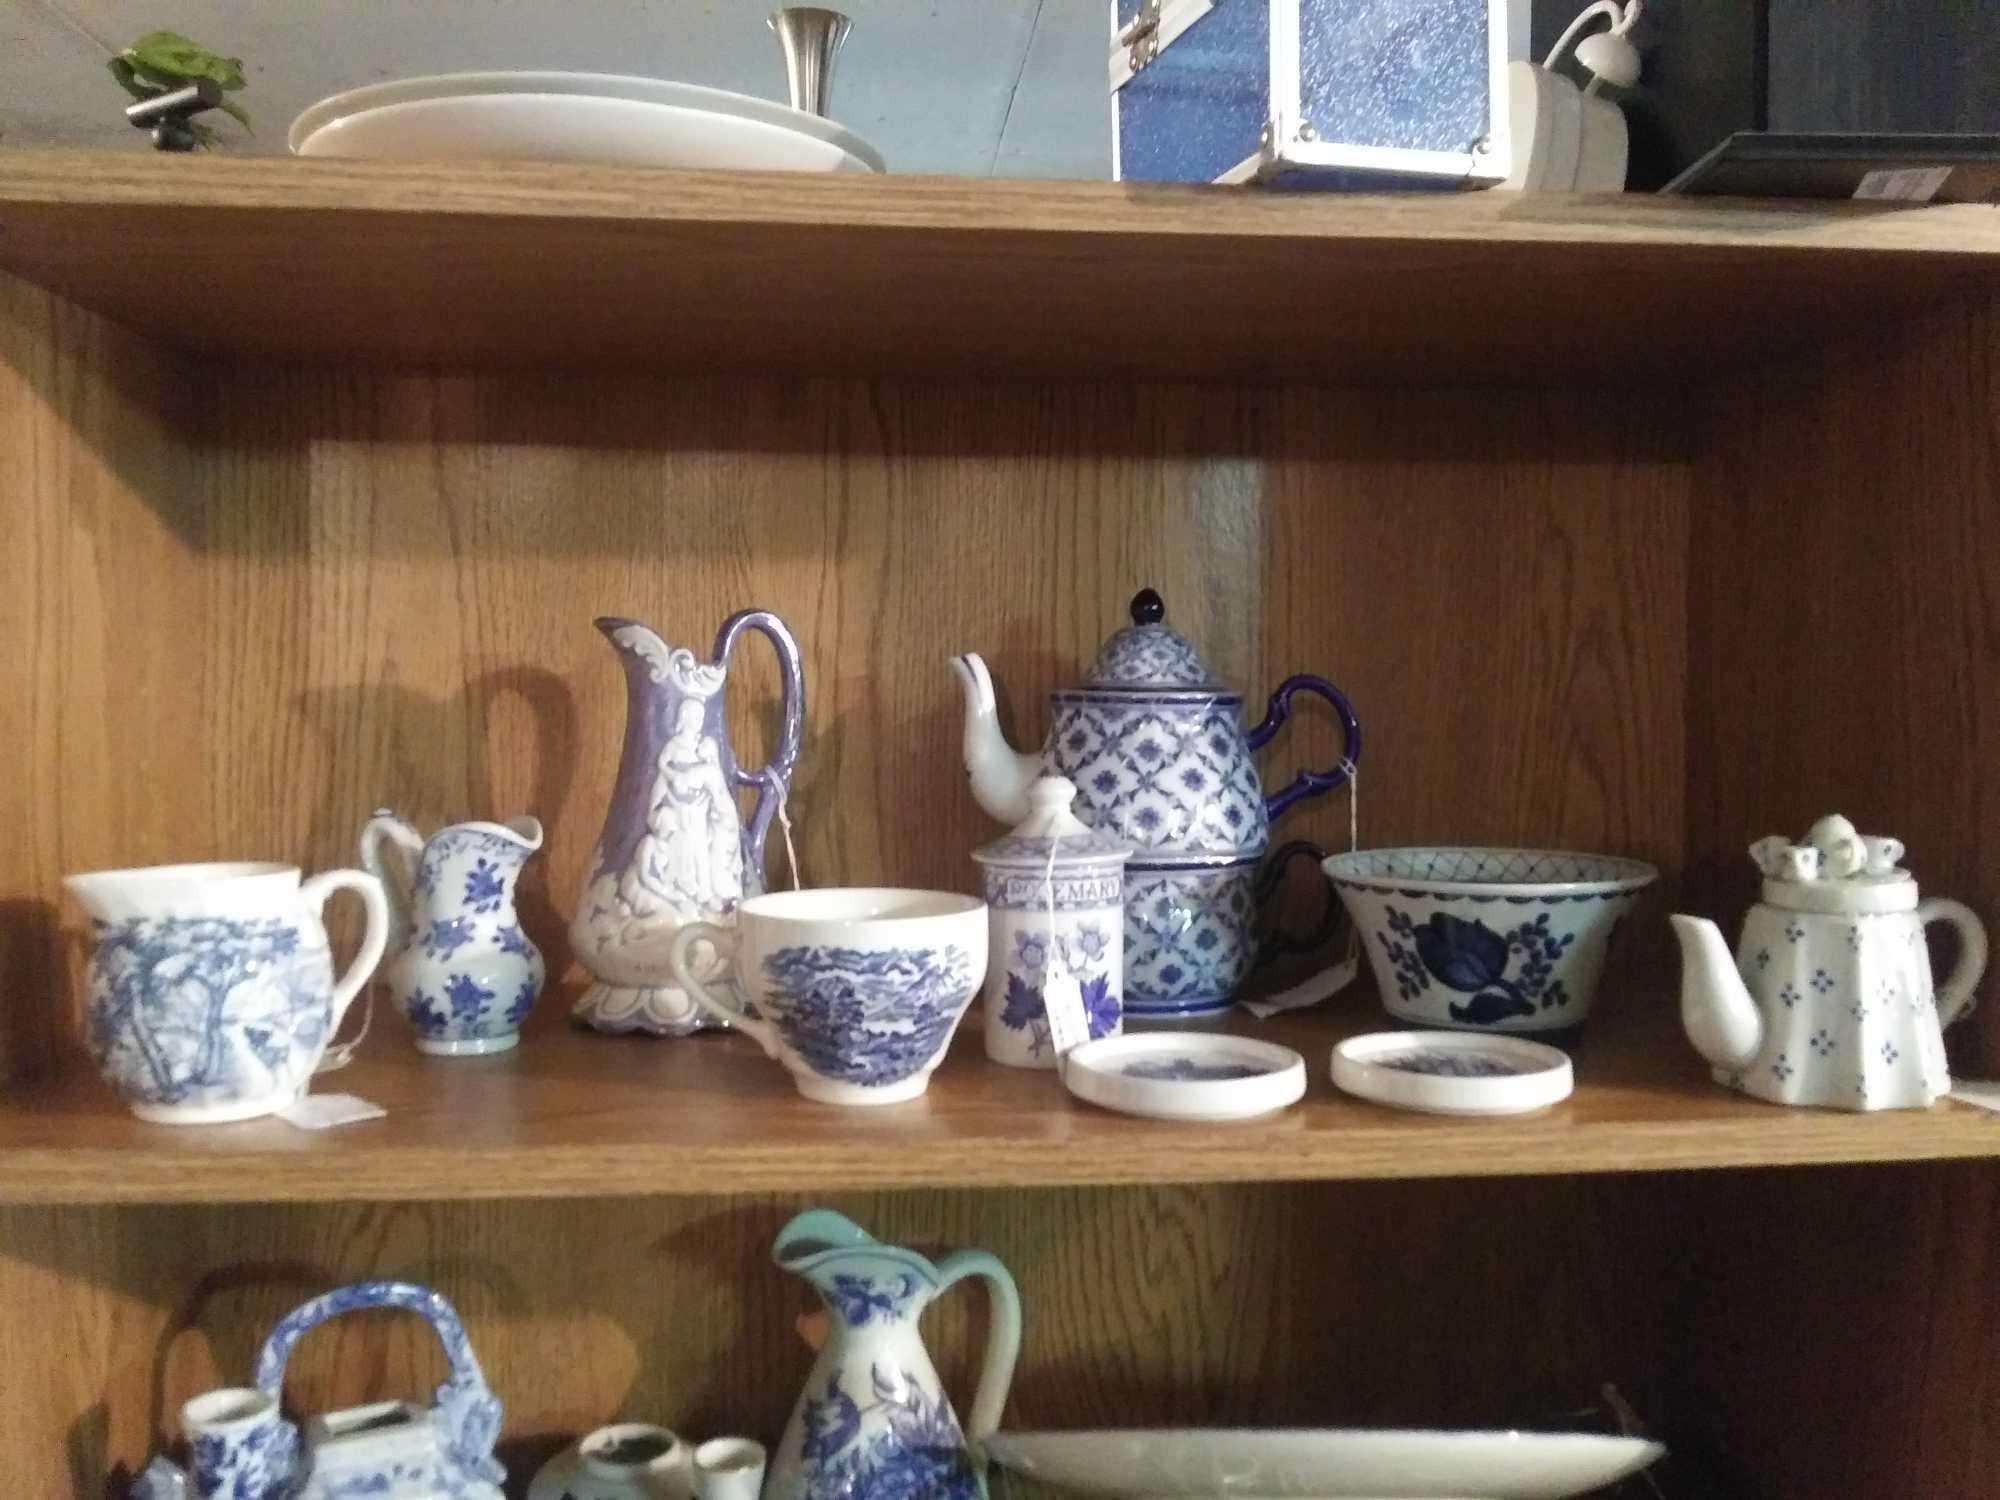 Selection of 10 Blue and White China/Porcelain Pieces Including Stacking Teapot